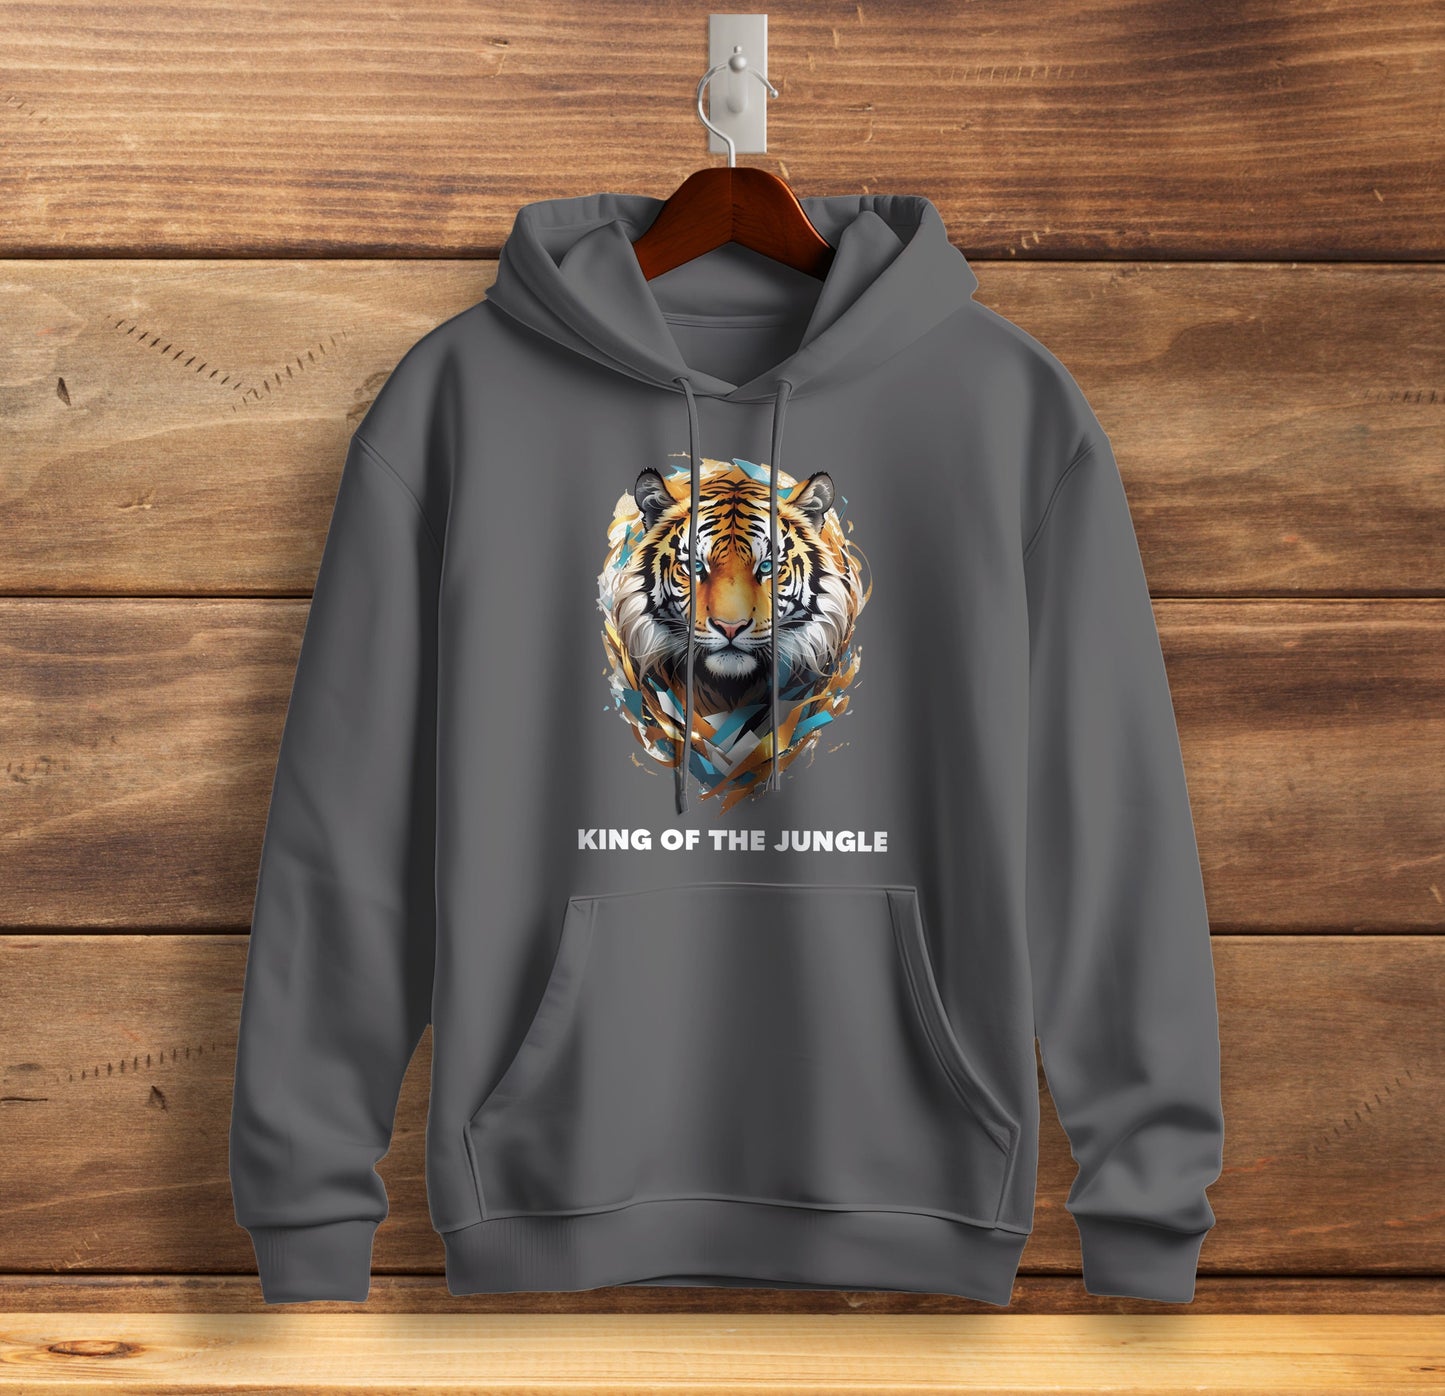 King of the Jungle - Tiger Graphic Printed Hooded Sweat Shirt for Men - Cotton - Magnificence of India Sweat Shirt